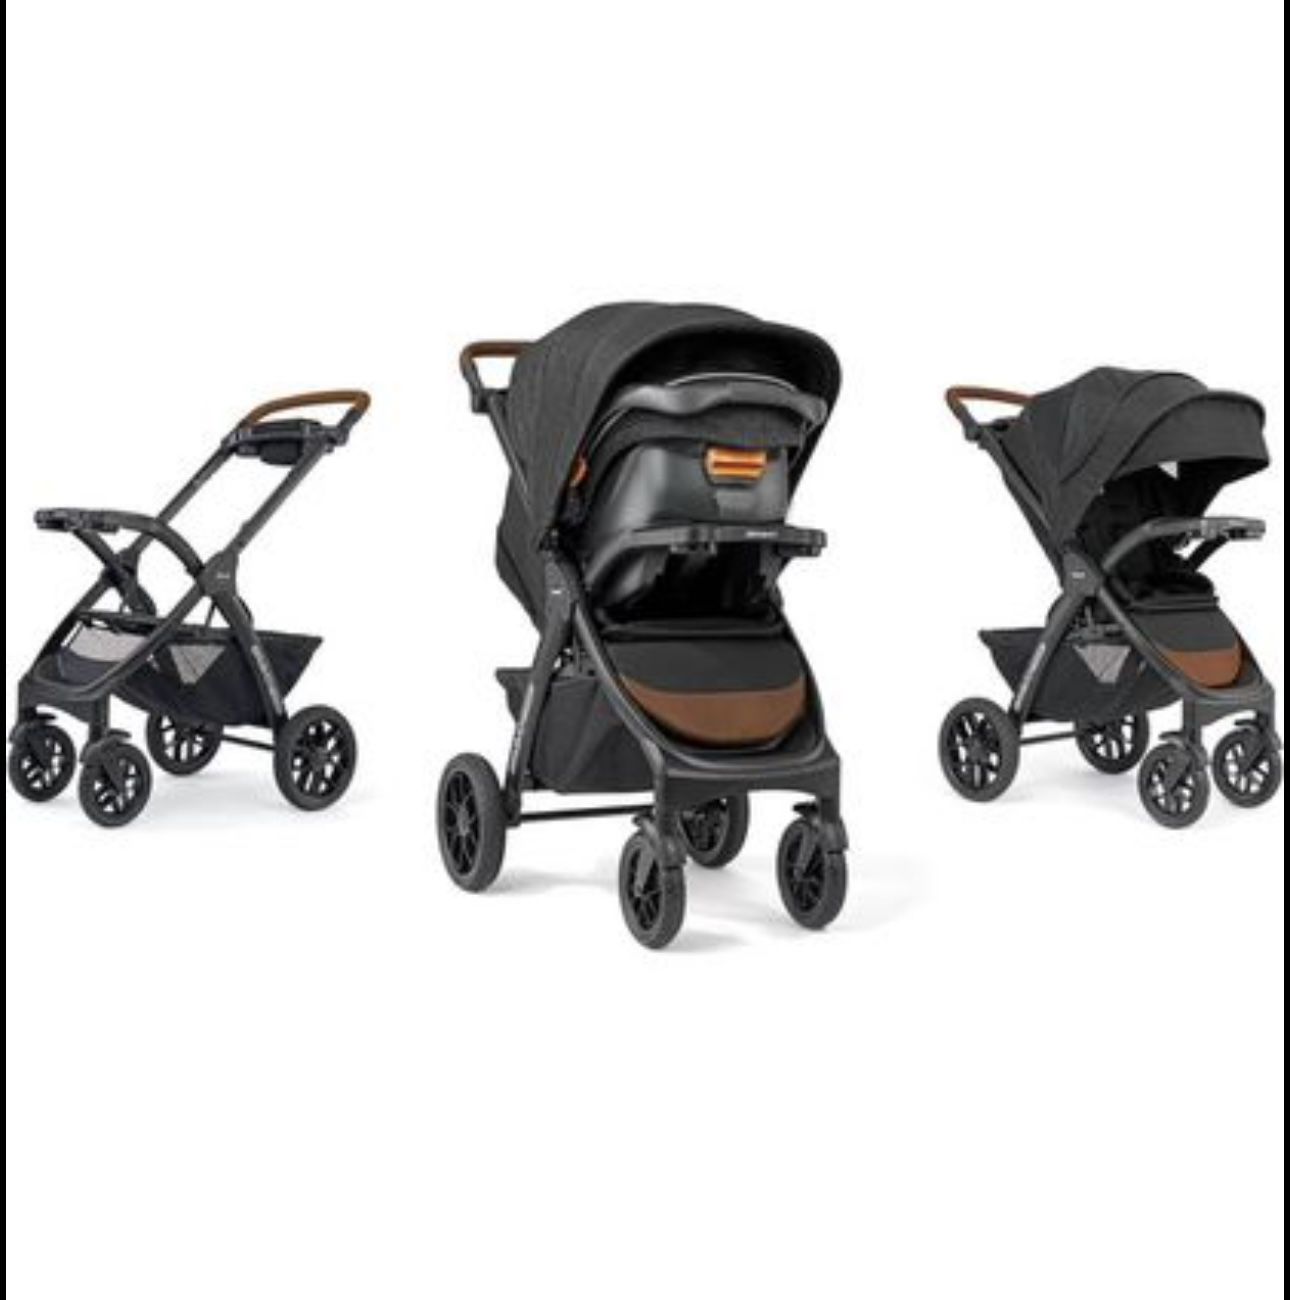 Chicco Stroller, Car Seat & Base